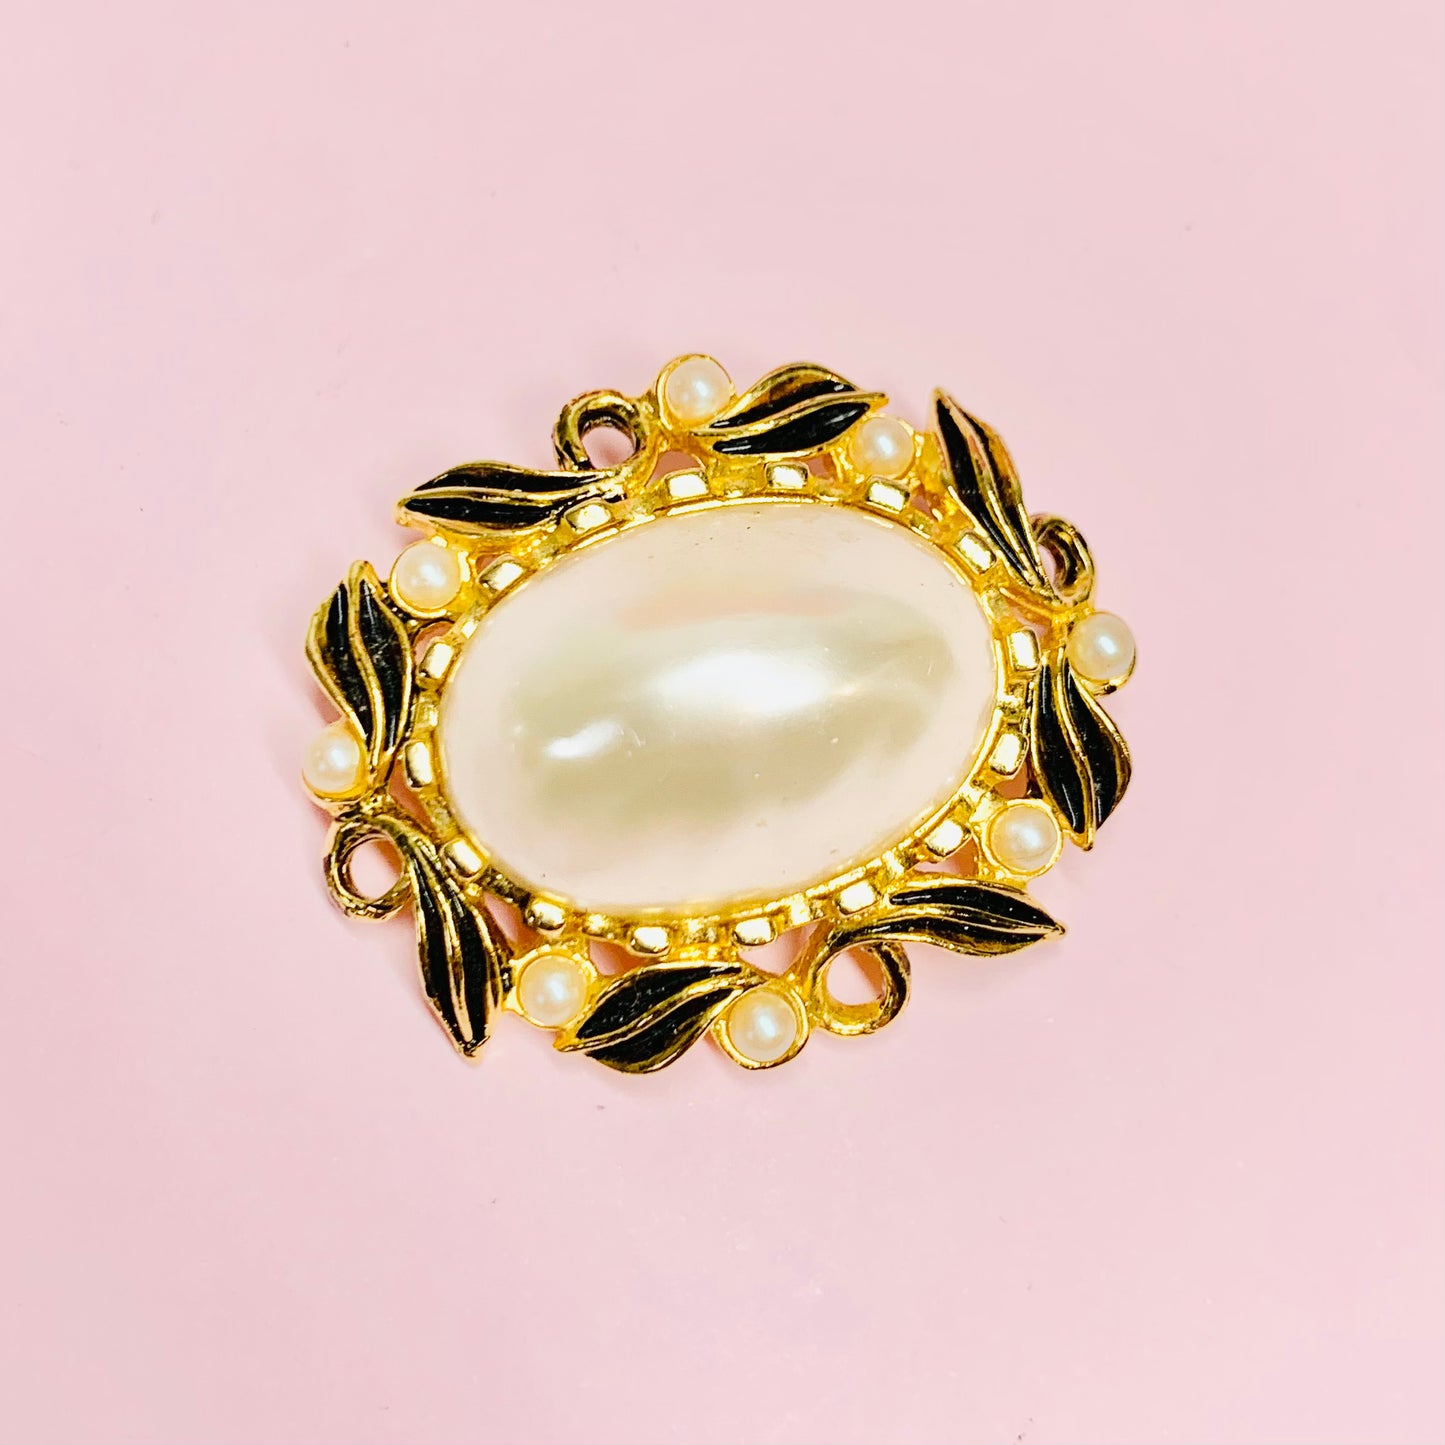 1950s plated alloy brooch with pearls and black enamel